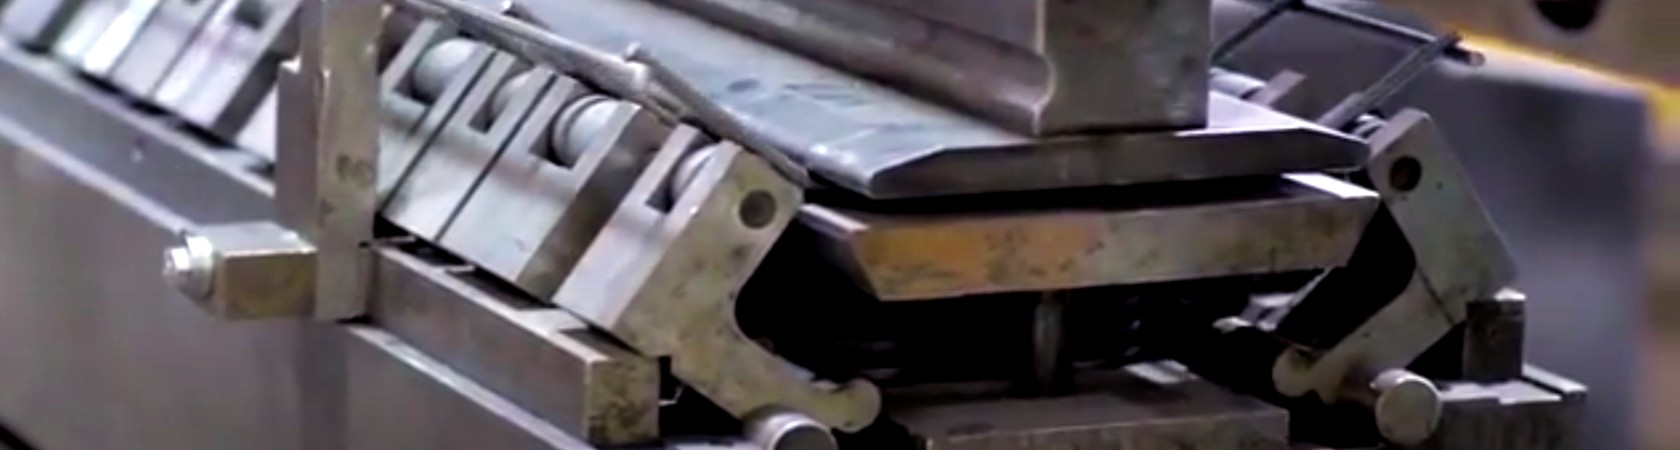 Steel Fabrication Using a Press Brake for Wire Form Bending